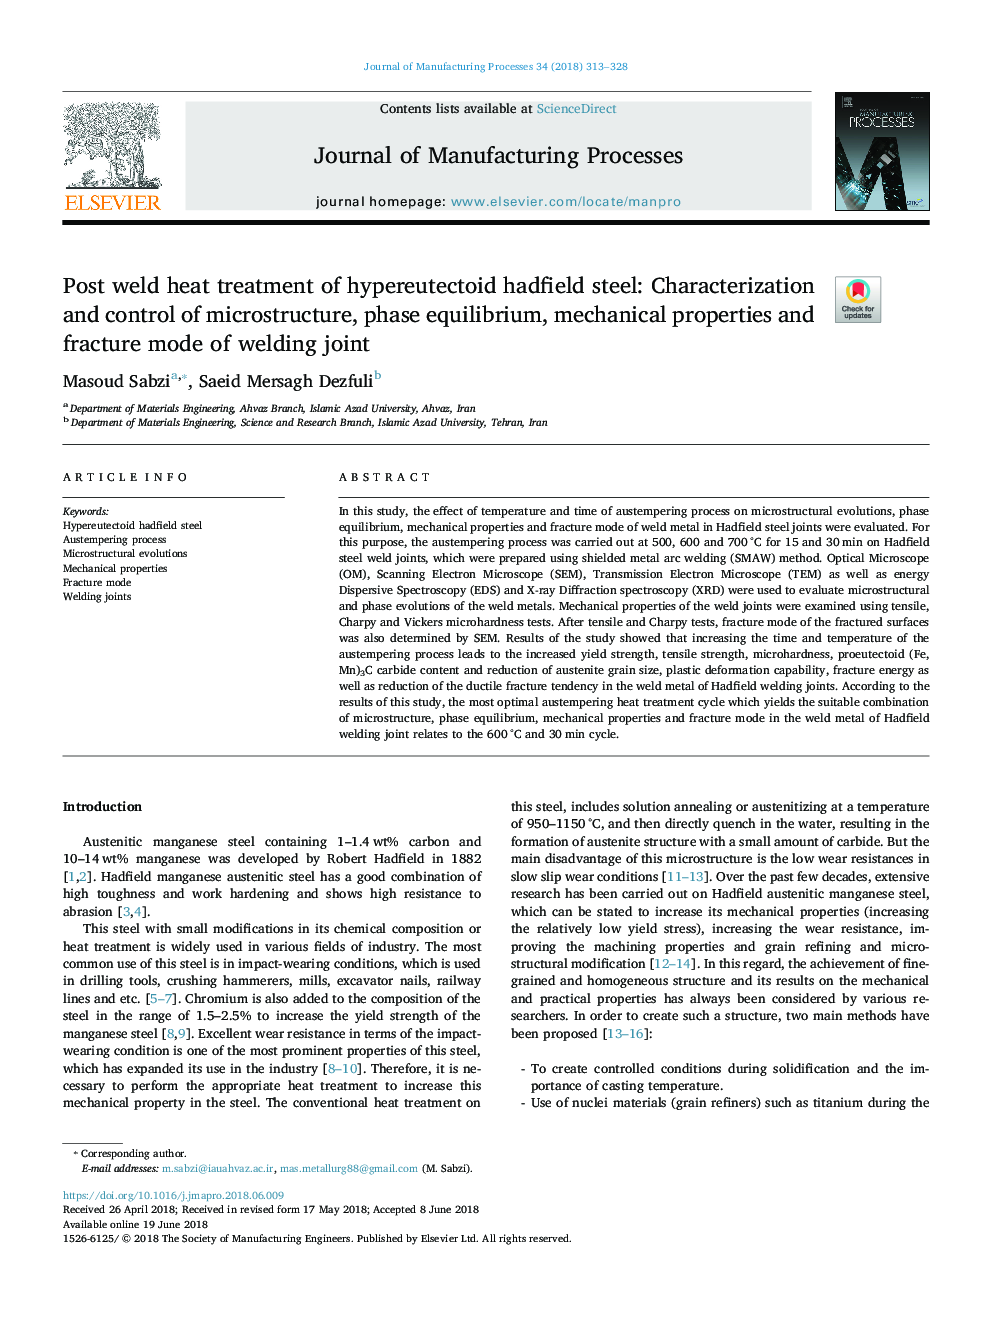 Post weld heat treatment of hypereutectoid hadfield steel: Characterization and control of microstructure, phase equilibrium, mechanical properties and fracture mode of welding joint